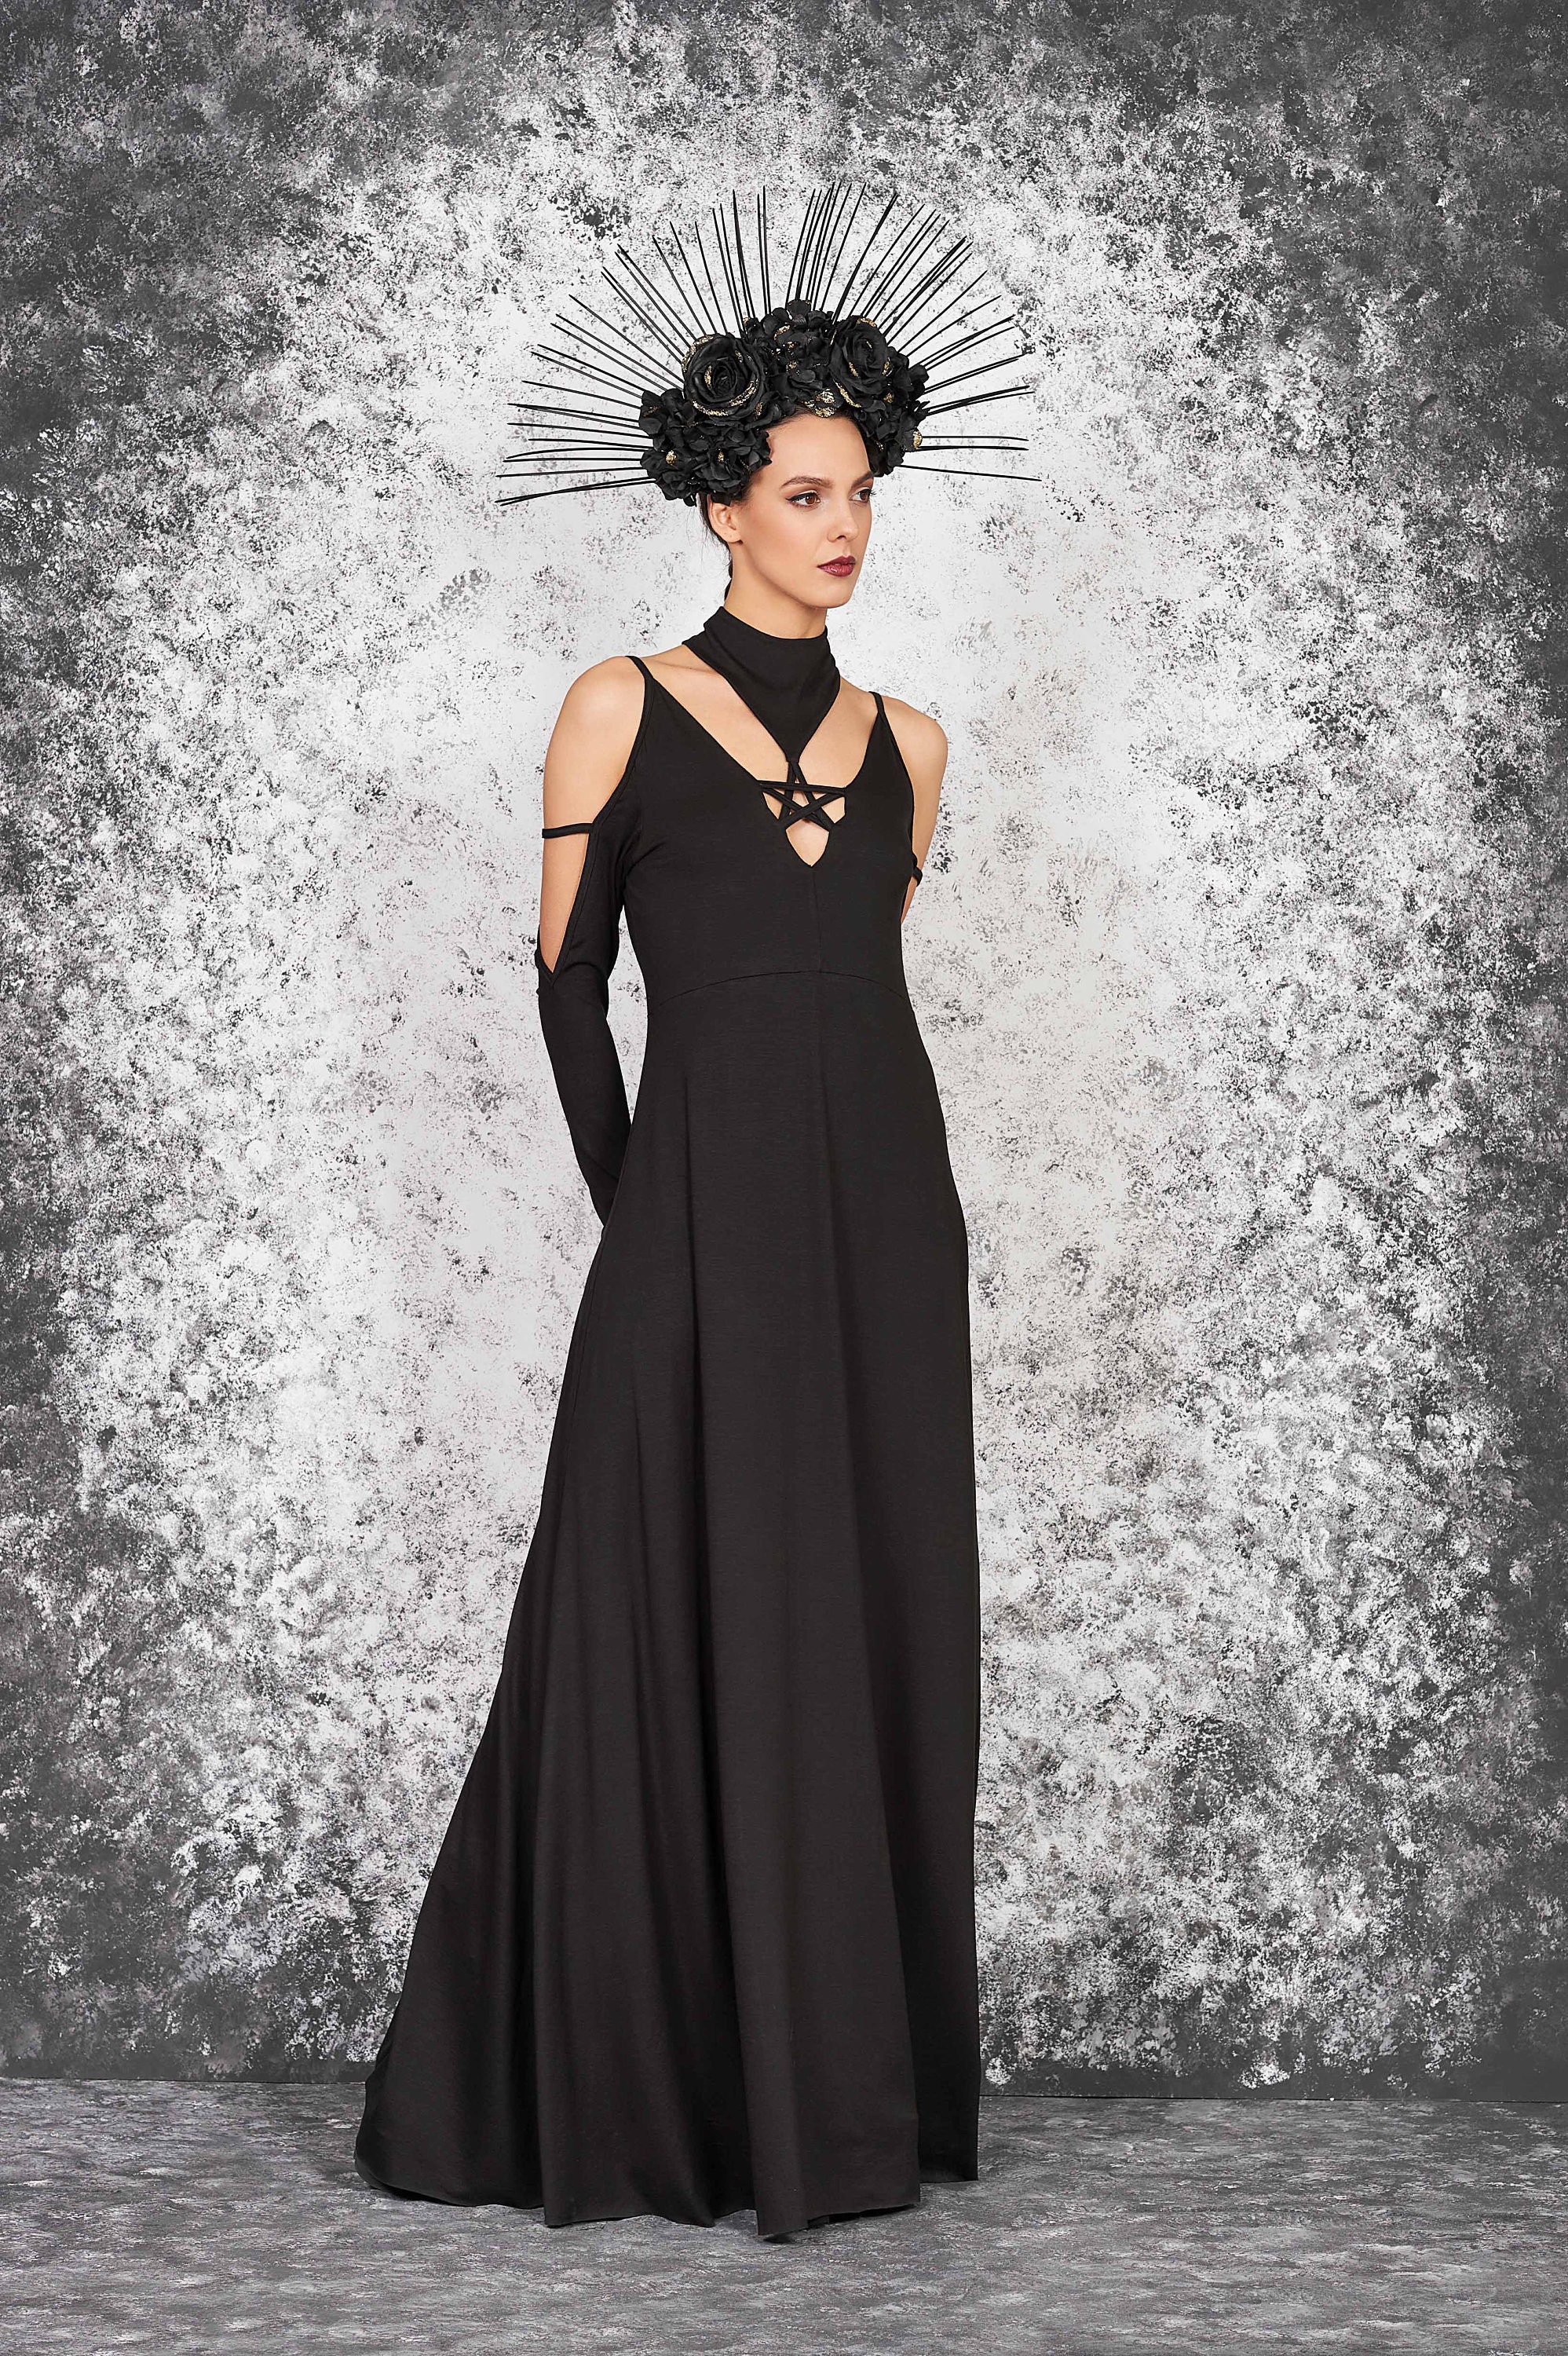 Buy Black Gothic Gown Online In India - Etsy India